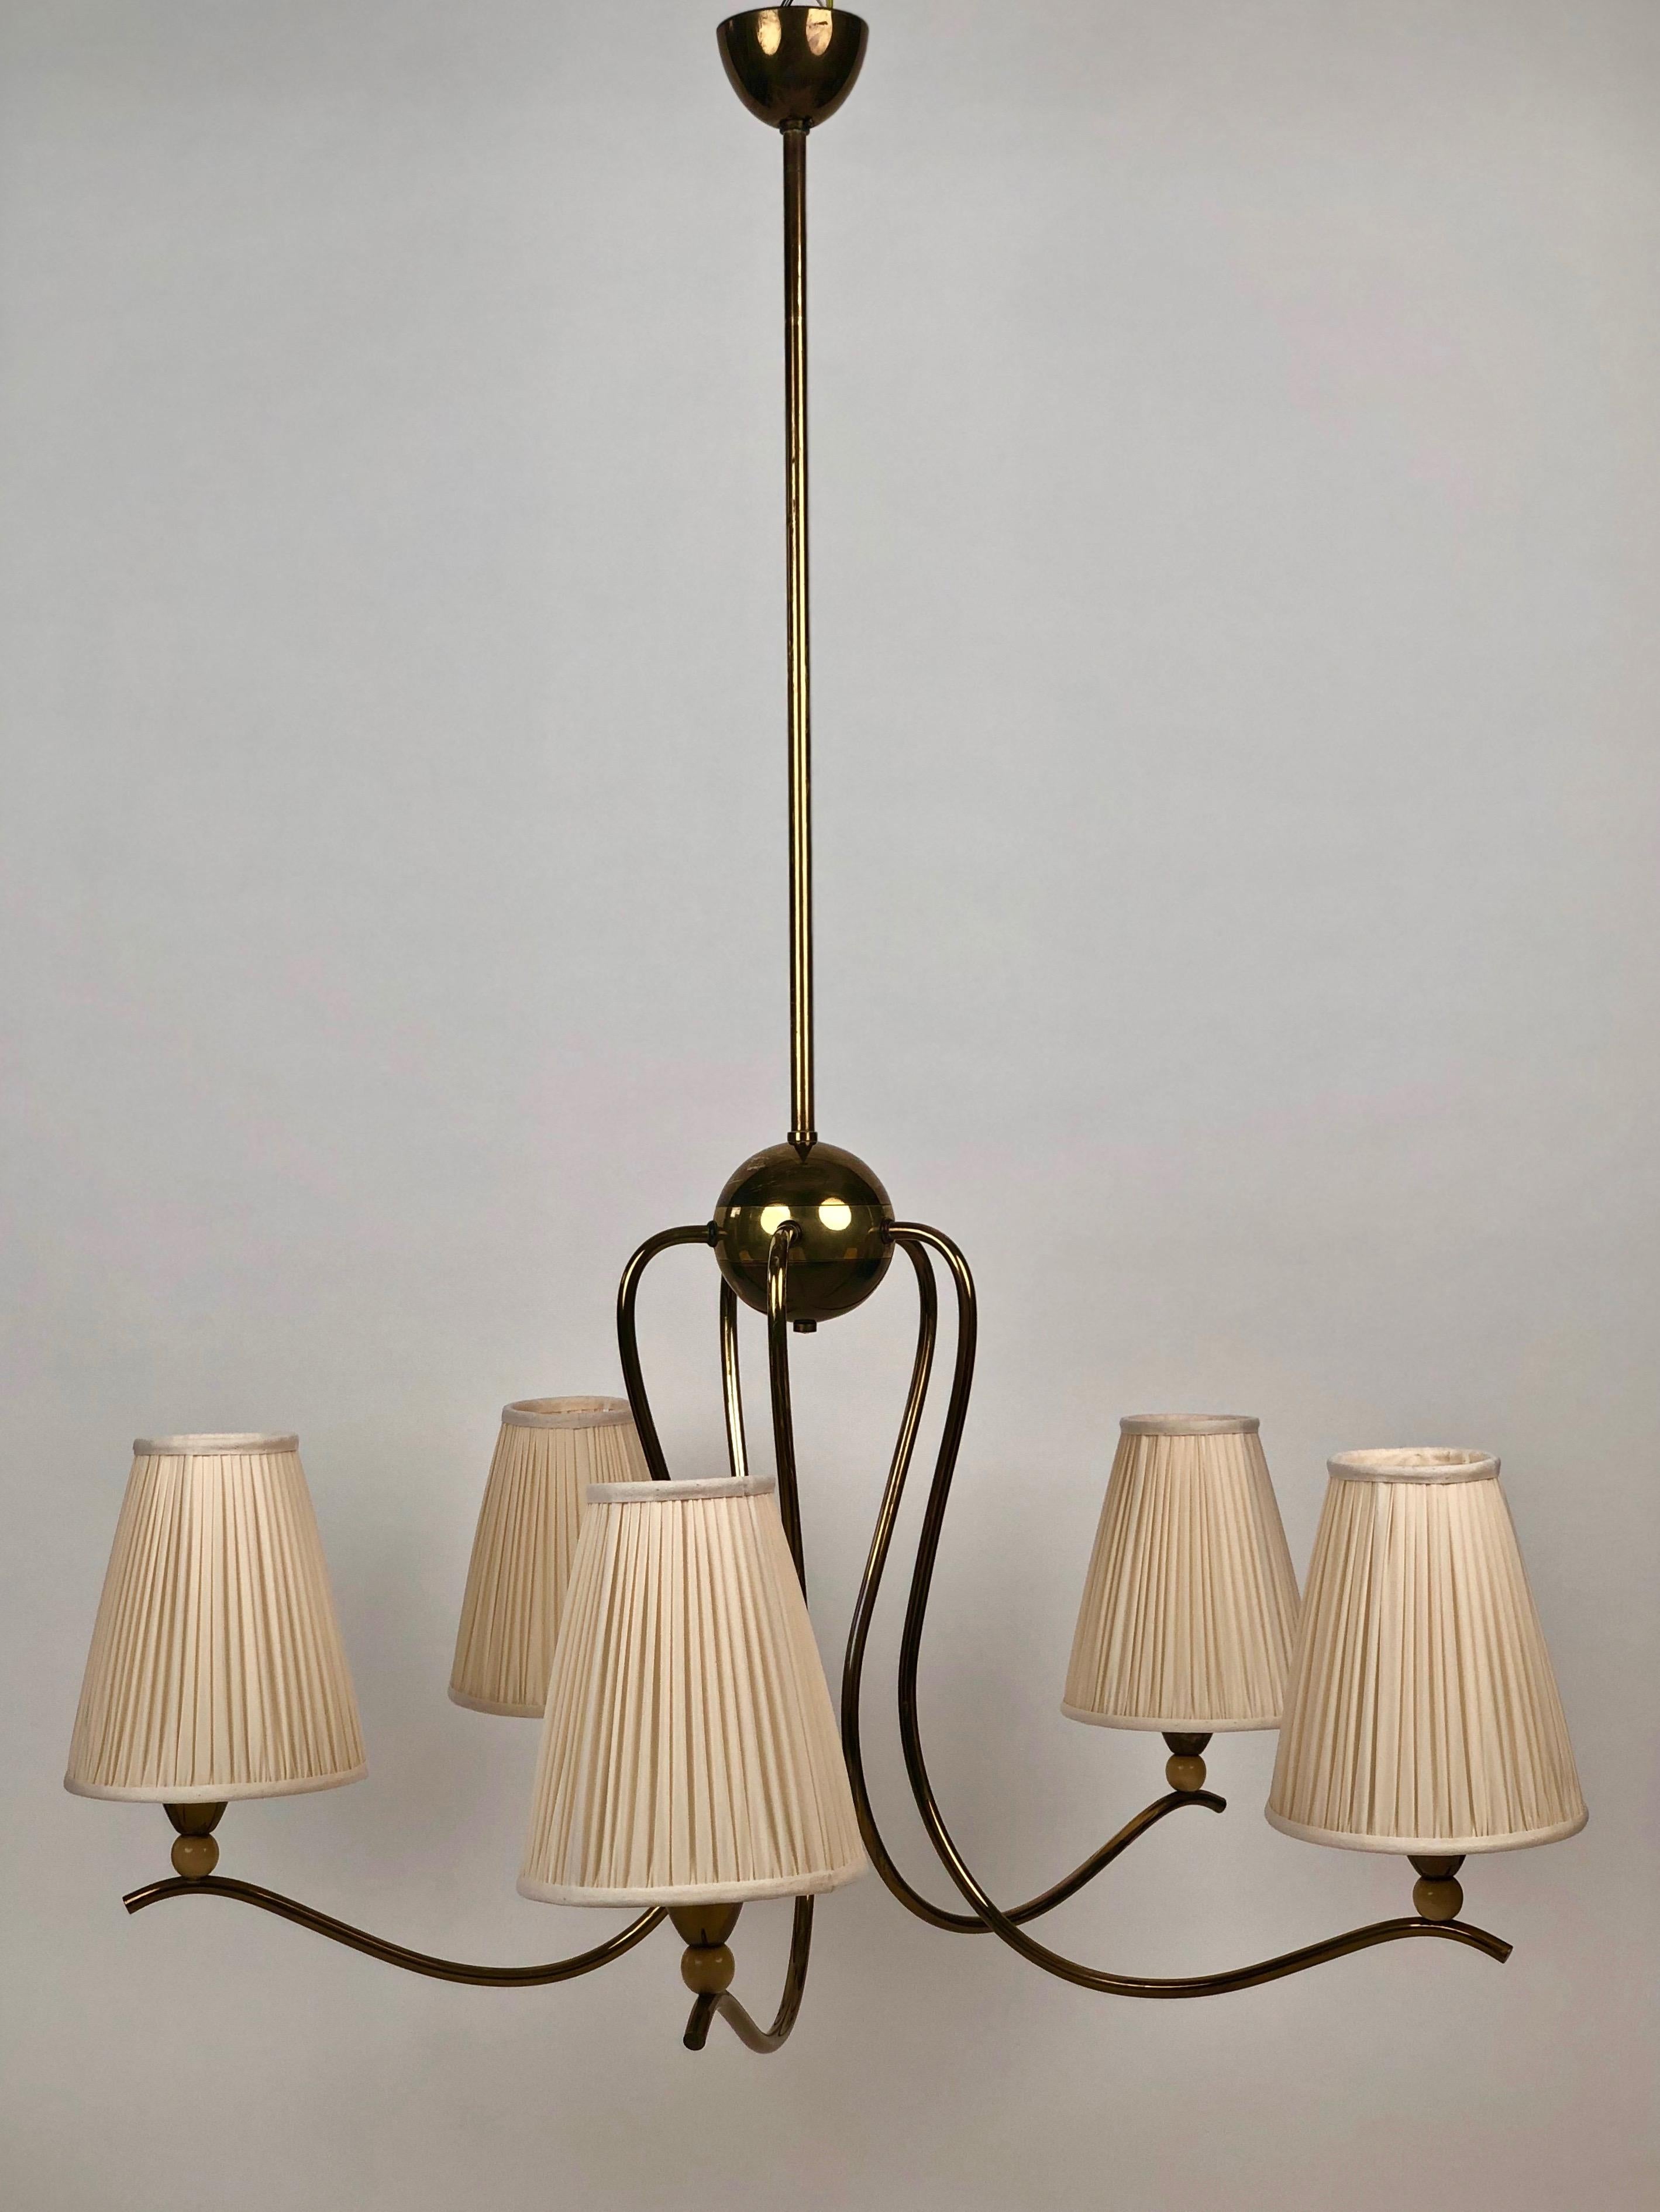 A large chandelier from Josef Frank, dating about 1925, Austria.
From the central ball flow five brass arms whose ends with brass fixtures for the shades.
Under the brass fixtures are placed small wooden balls, lacquered in creme colour.
This